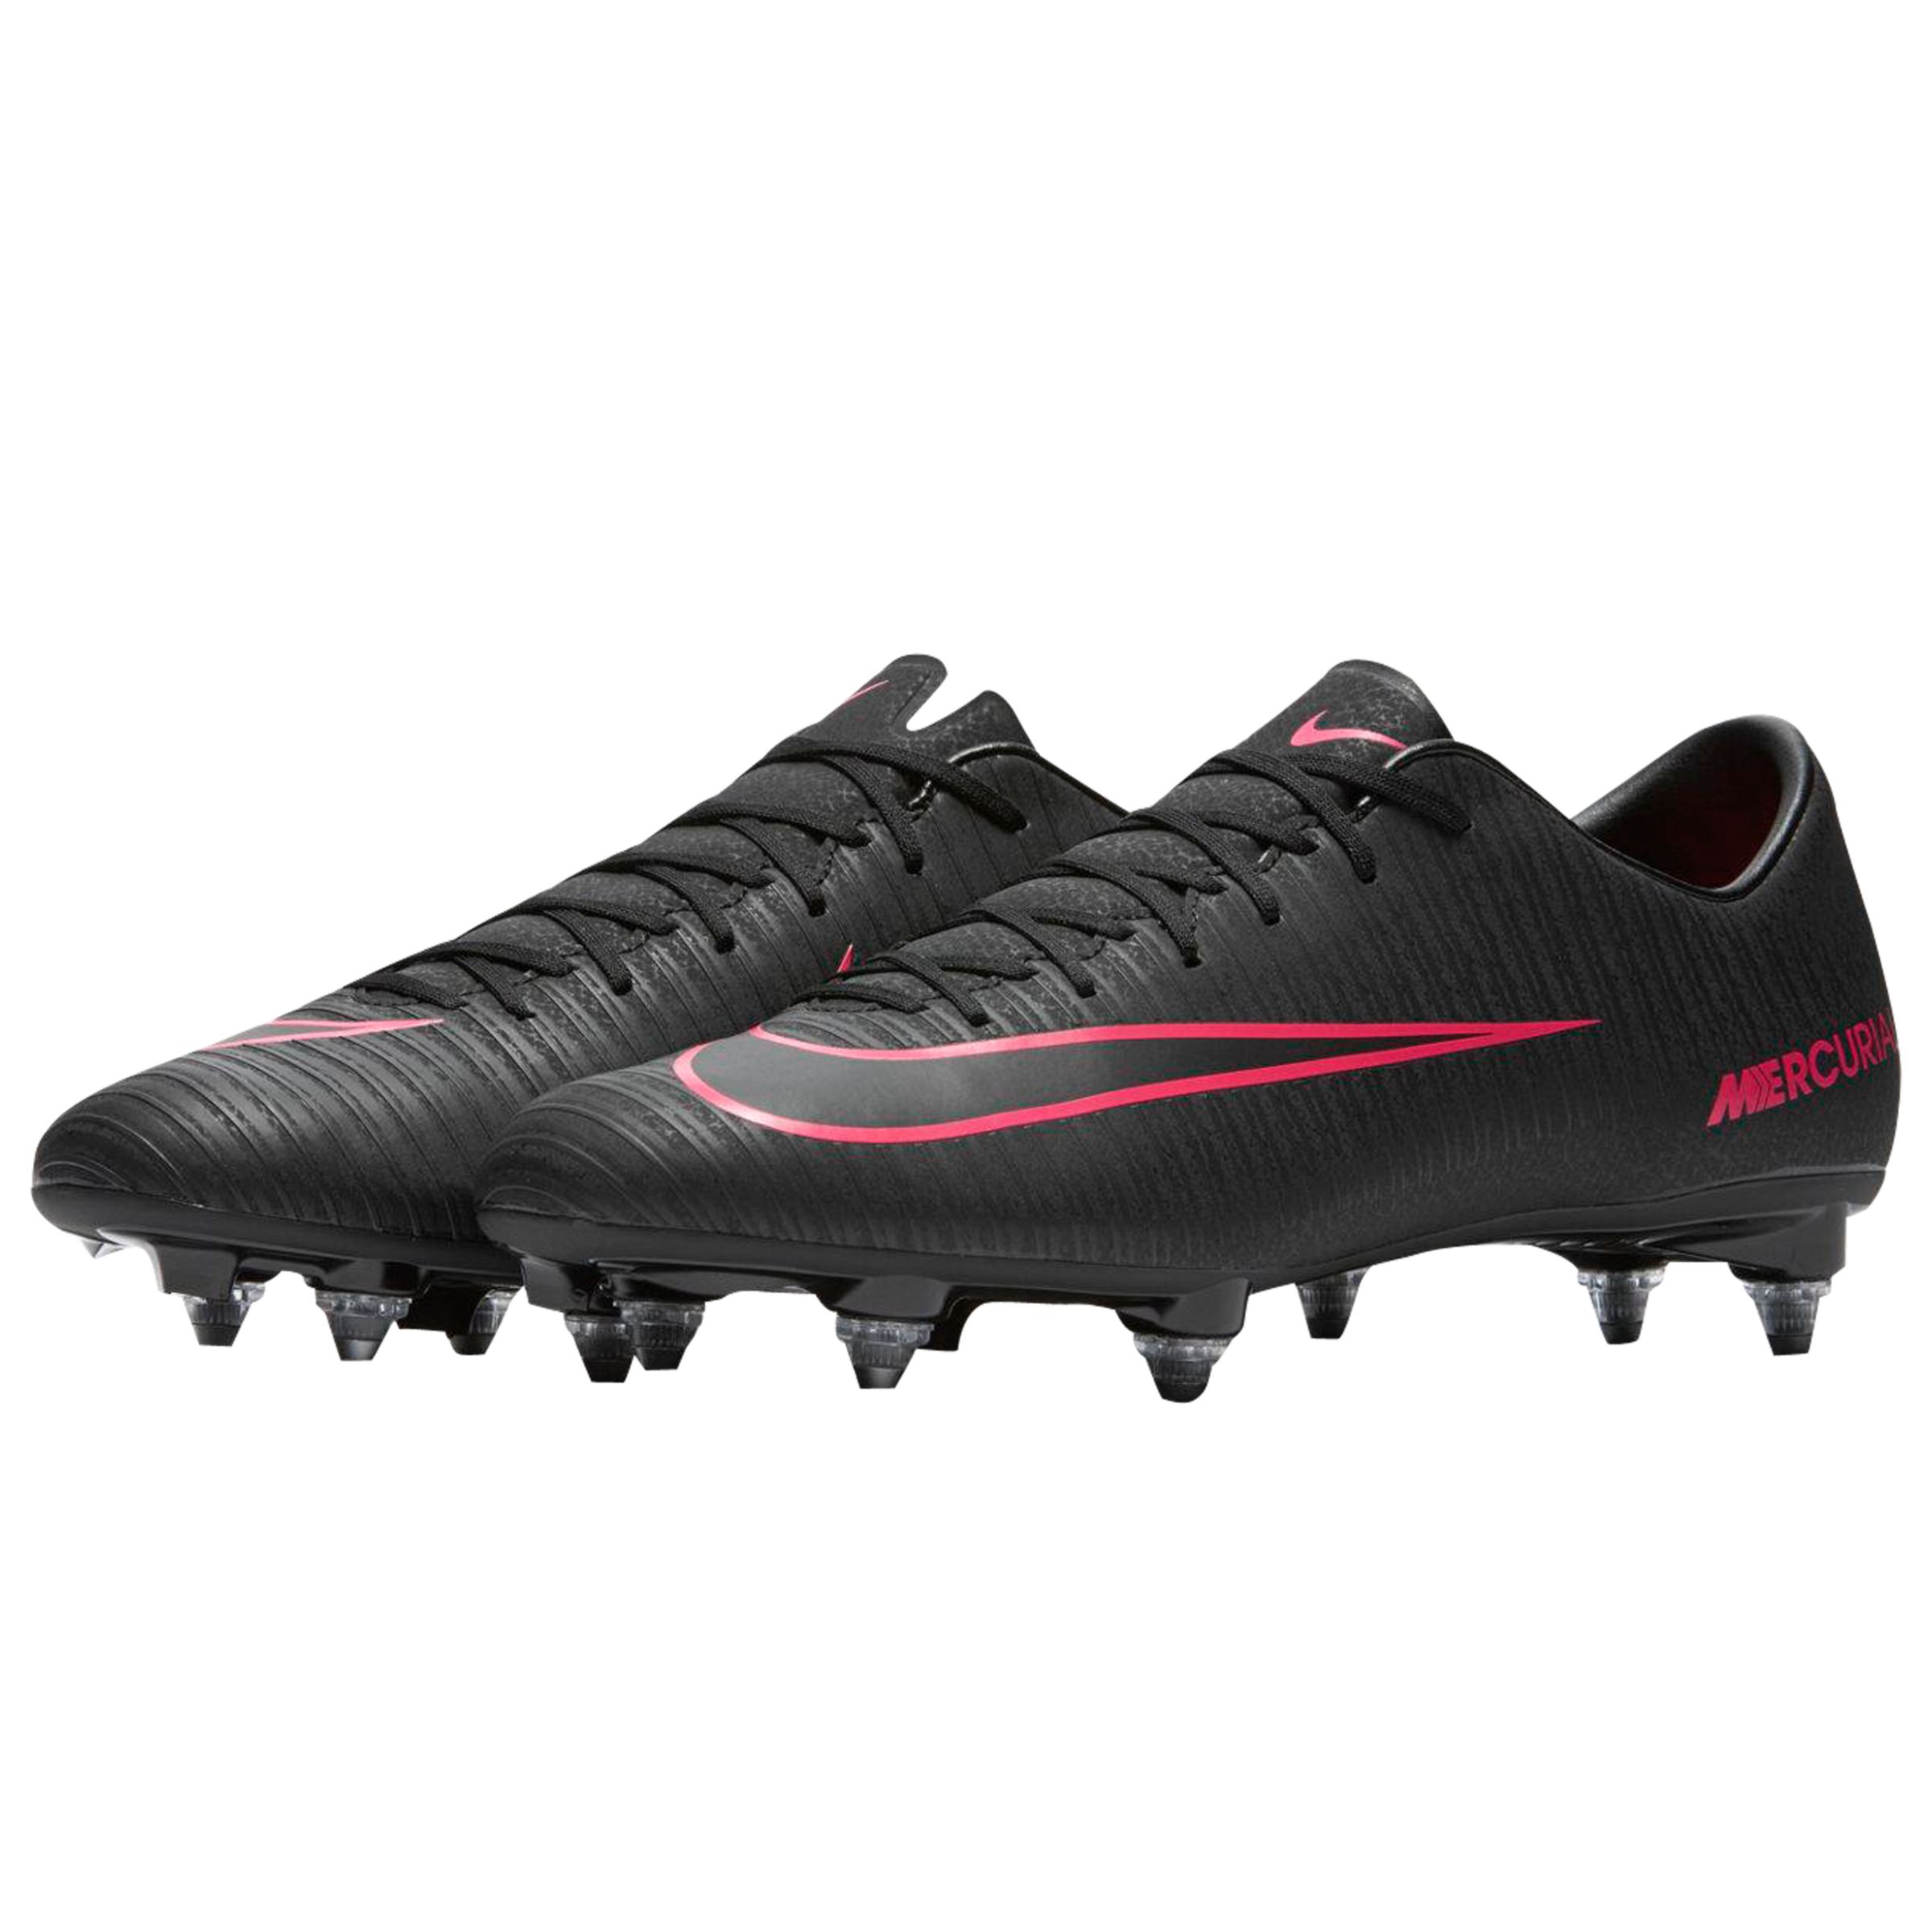 nike men's soft ground football boots